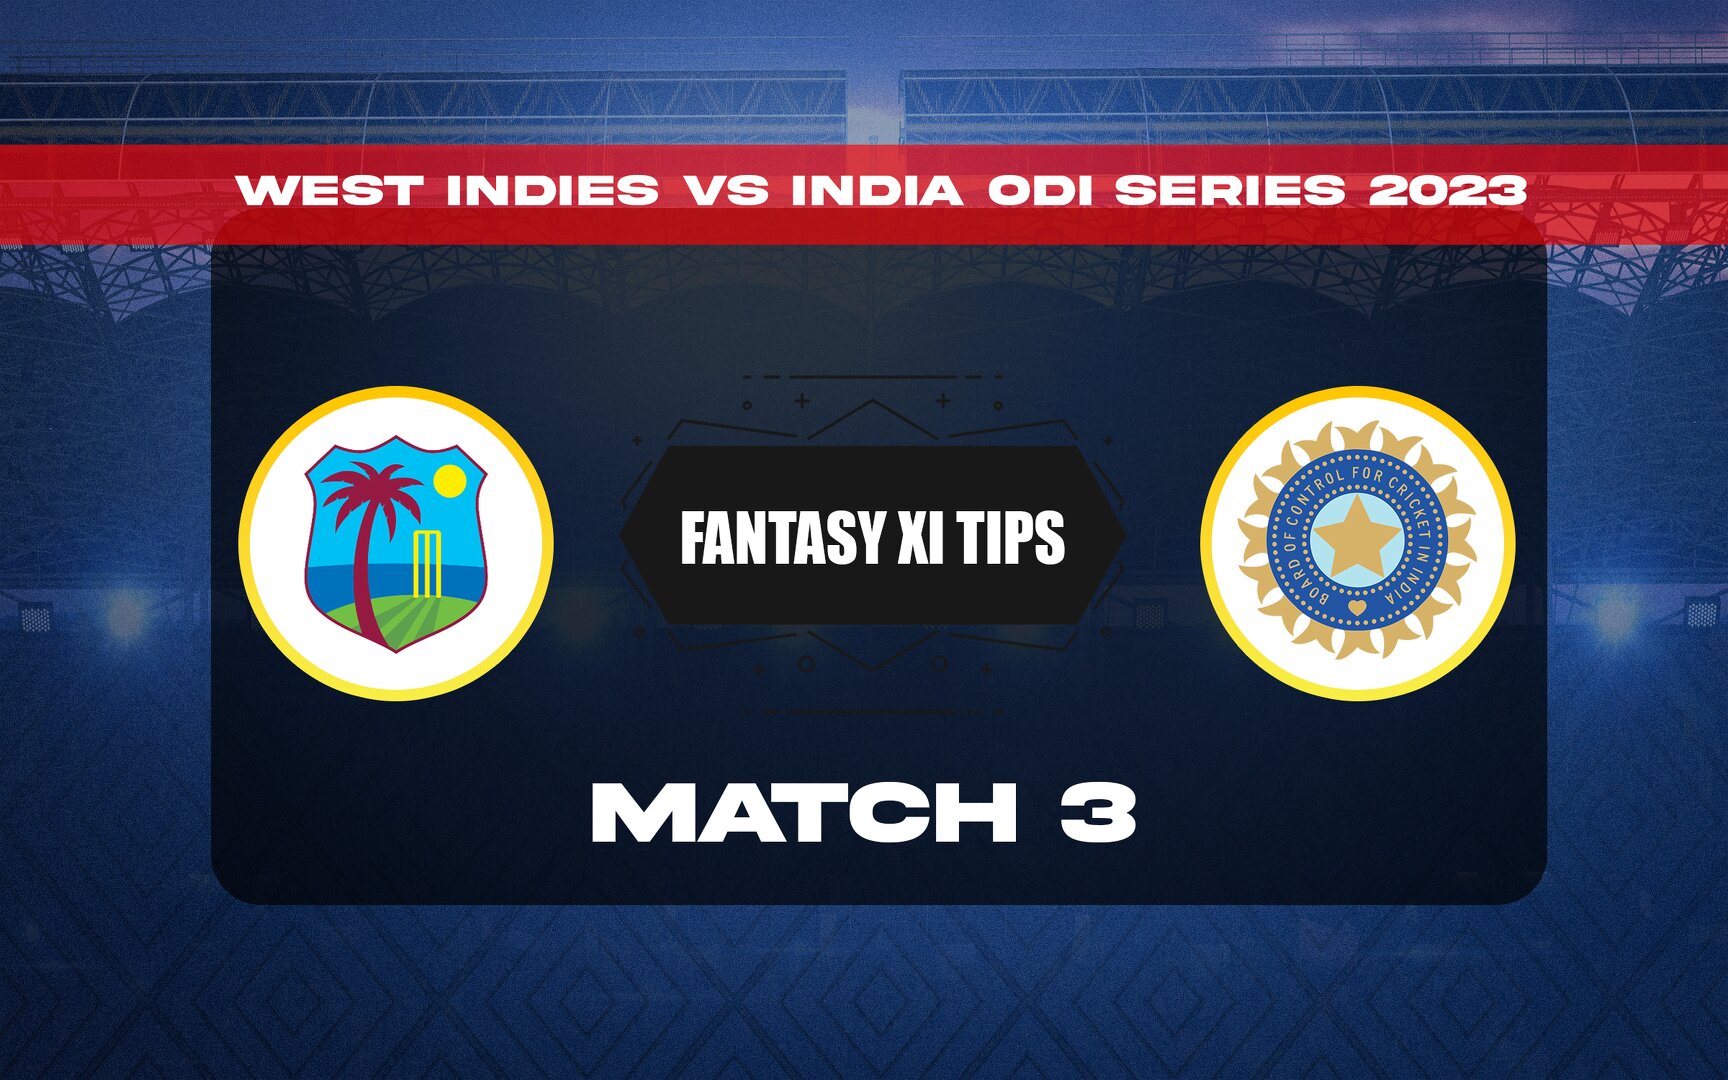 Ind Vs Wi Dream11 Prediction Dream11 Playing Xi Today 3rd Odi Indias Tour Of West Indies 2023 6319